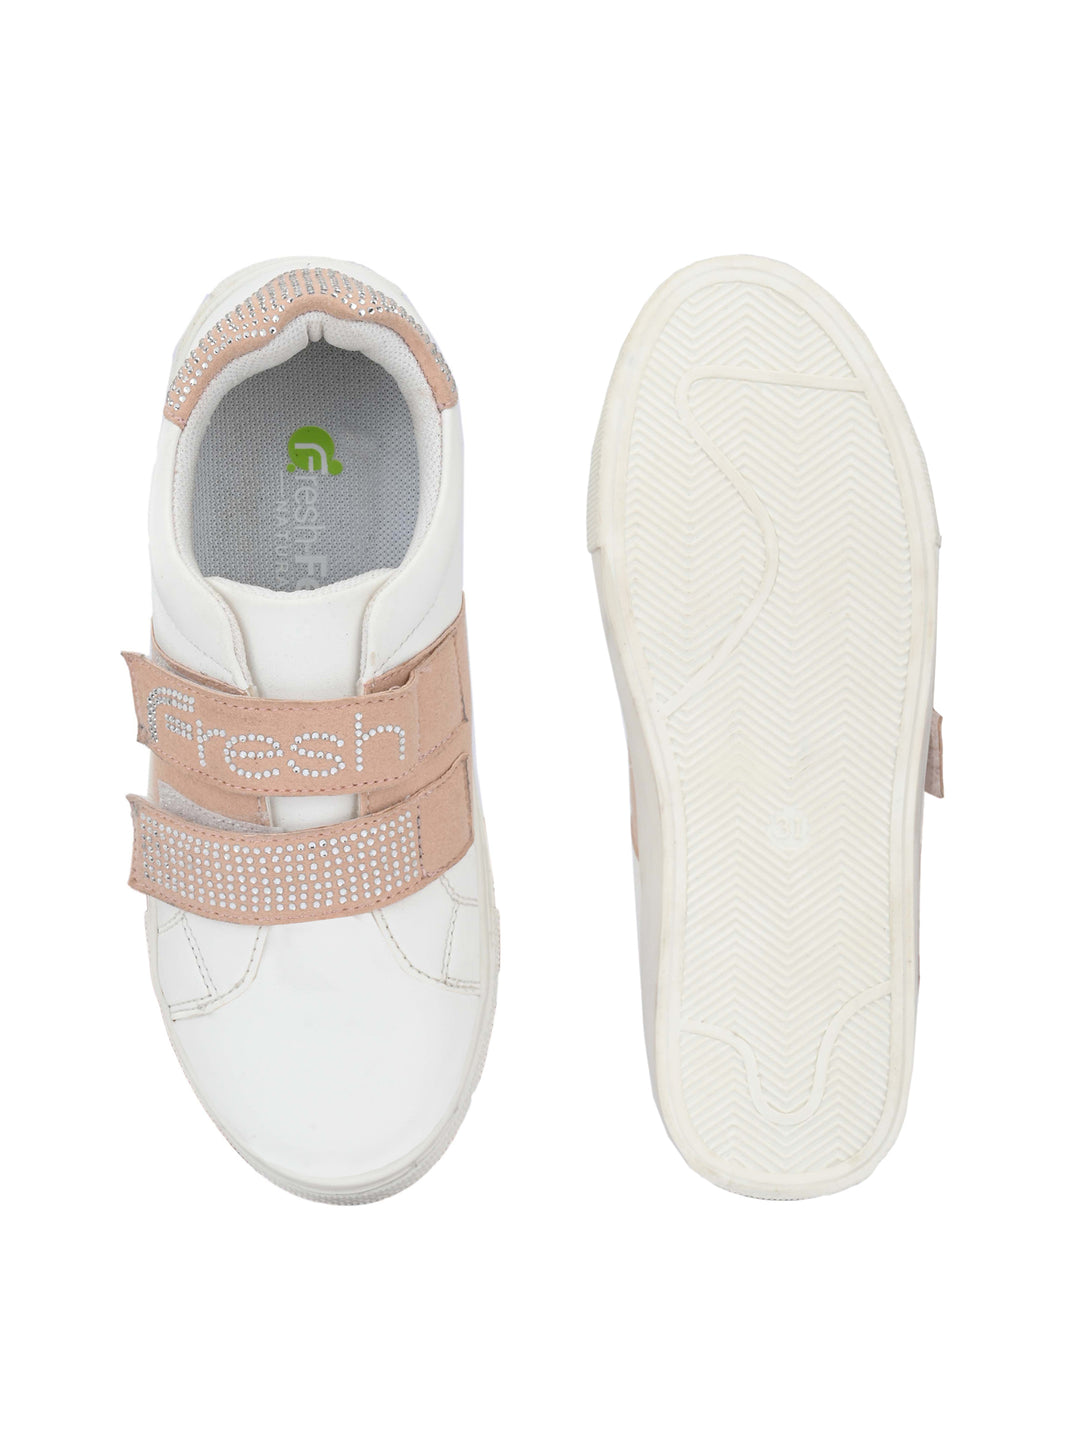 Niko White Pink Dual Size technology Shoes for Kids